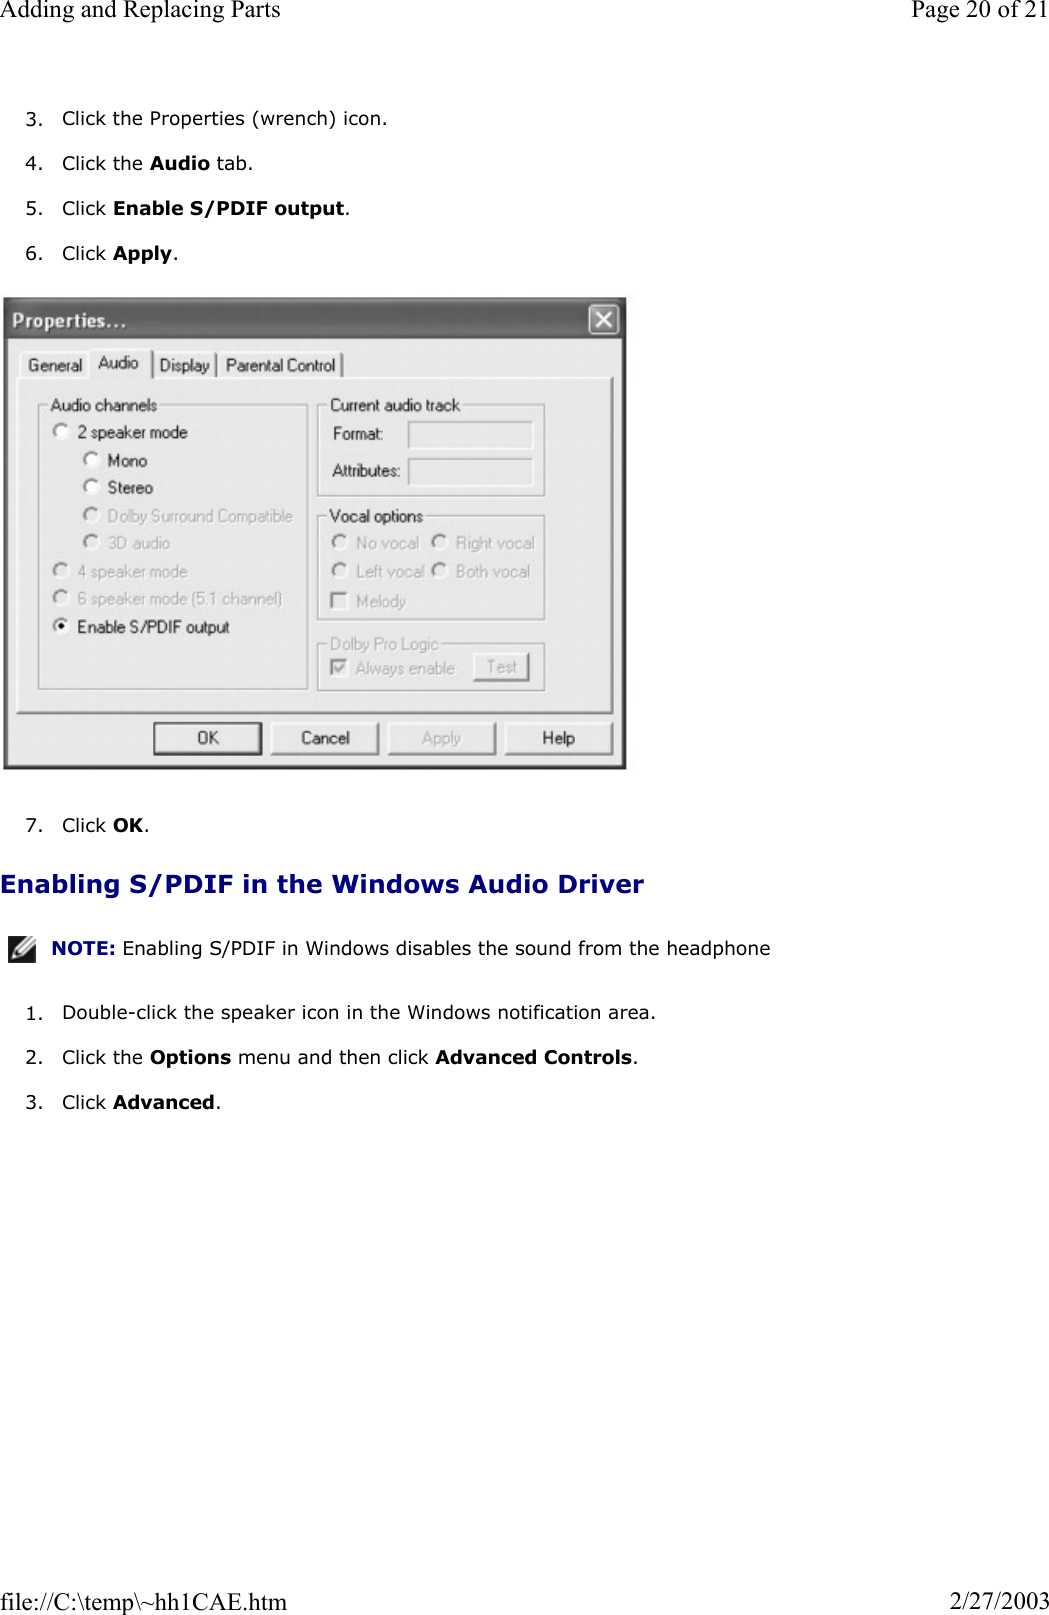 3. Click the Properties (wrench) icon. 4. Click the Audio tab. 5. Click Enable S/PDIF output.6. Click Apply.7. Click OK.Enabling S/PDIF in the Windows Audio Driver 1. Double-click the speaker icon in the Windows notification area. 2. Click the Options menu and then click Advanced Controls.3. Click Advanced.NOTE: Enabling S/PDIF in Windows disables the sound from the headphone Page 20 of 21Adding and Replacing Parts2/27/2003file://C:\temp\~hh1CAE.htm